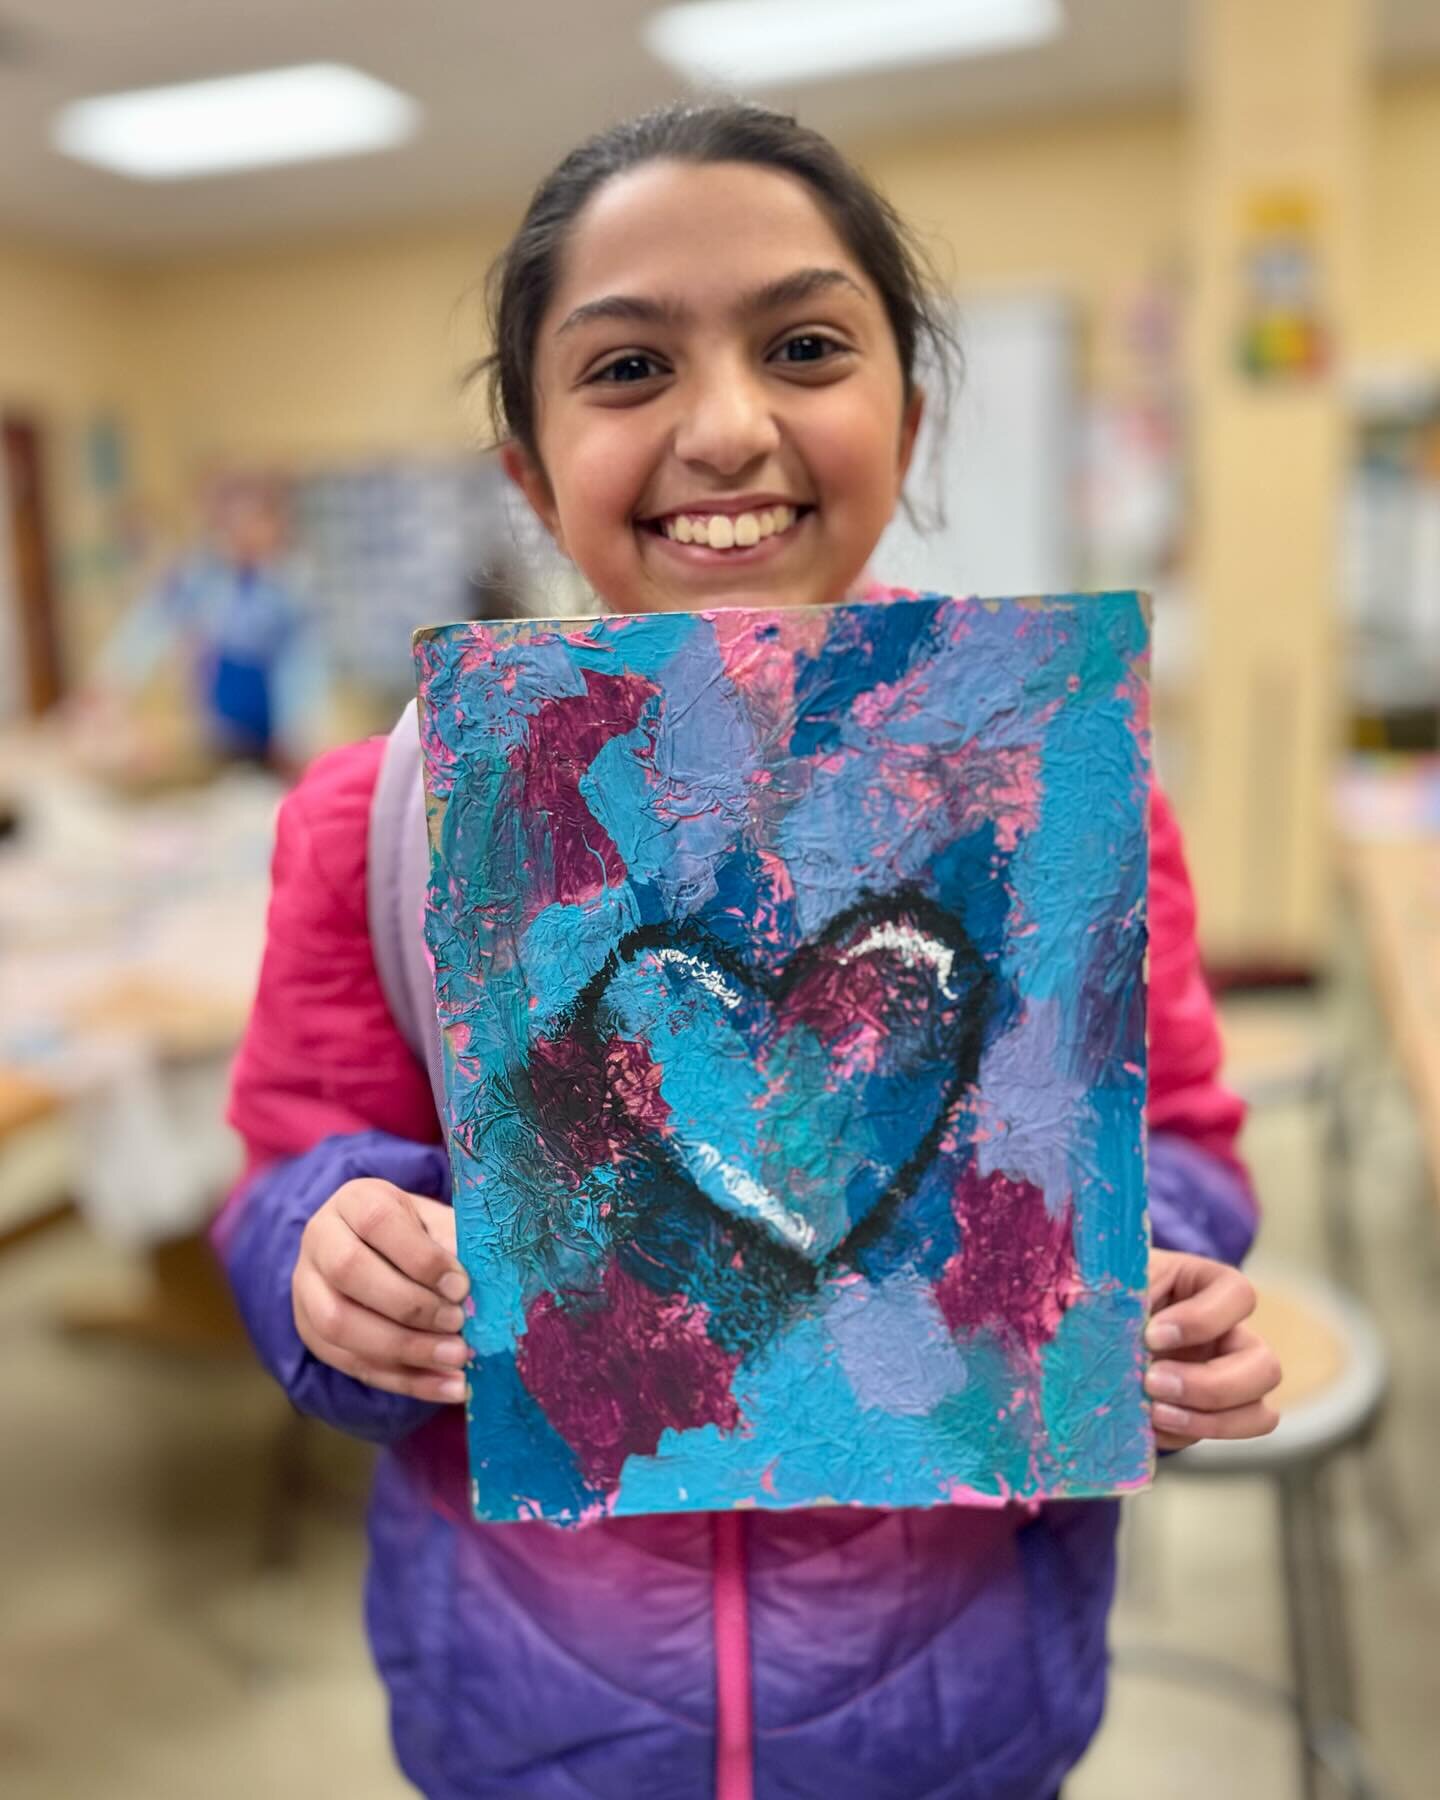 A couple days late for Valentine&rsquo;s Day, but we finished these collages last night by coloring a 3-d heart over the top. We practiced shading a bit before making the final heart and adding highlights and shadows to the shape. 

Such a simple pro